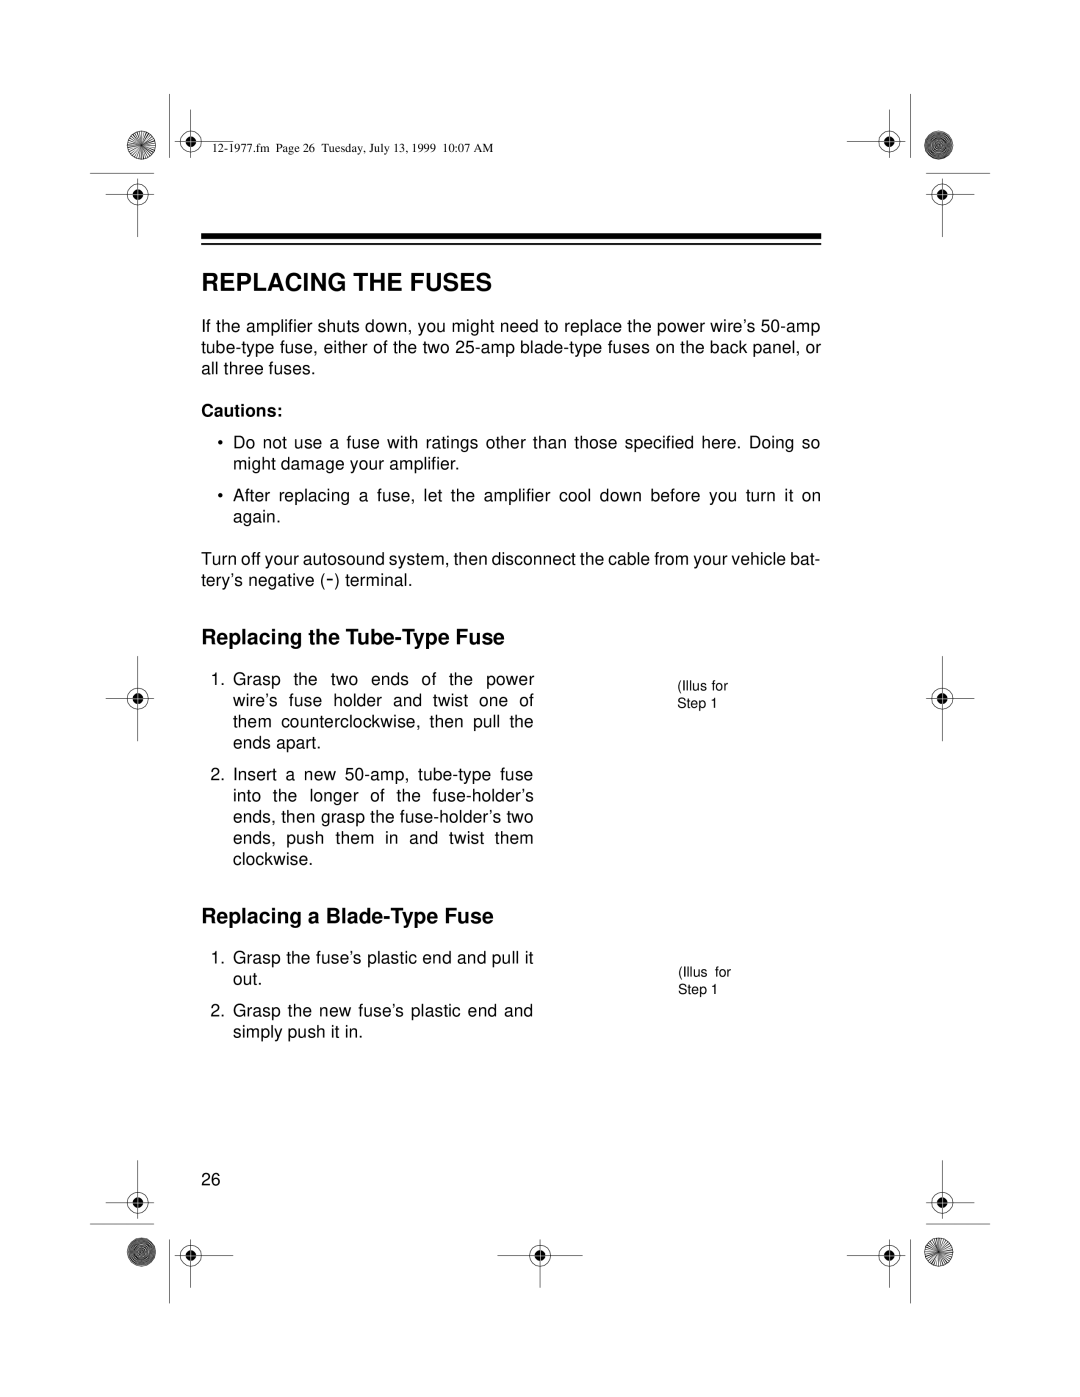 Radio Shack 85 owner manual Replacing The Fuses, Replacing the Tube-TypeFuse, Replacing a Blade-TypeFuse, Cautions 